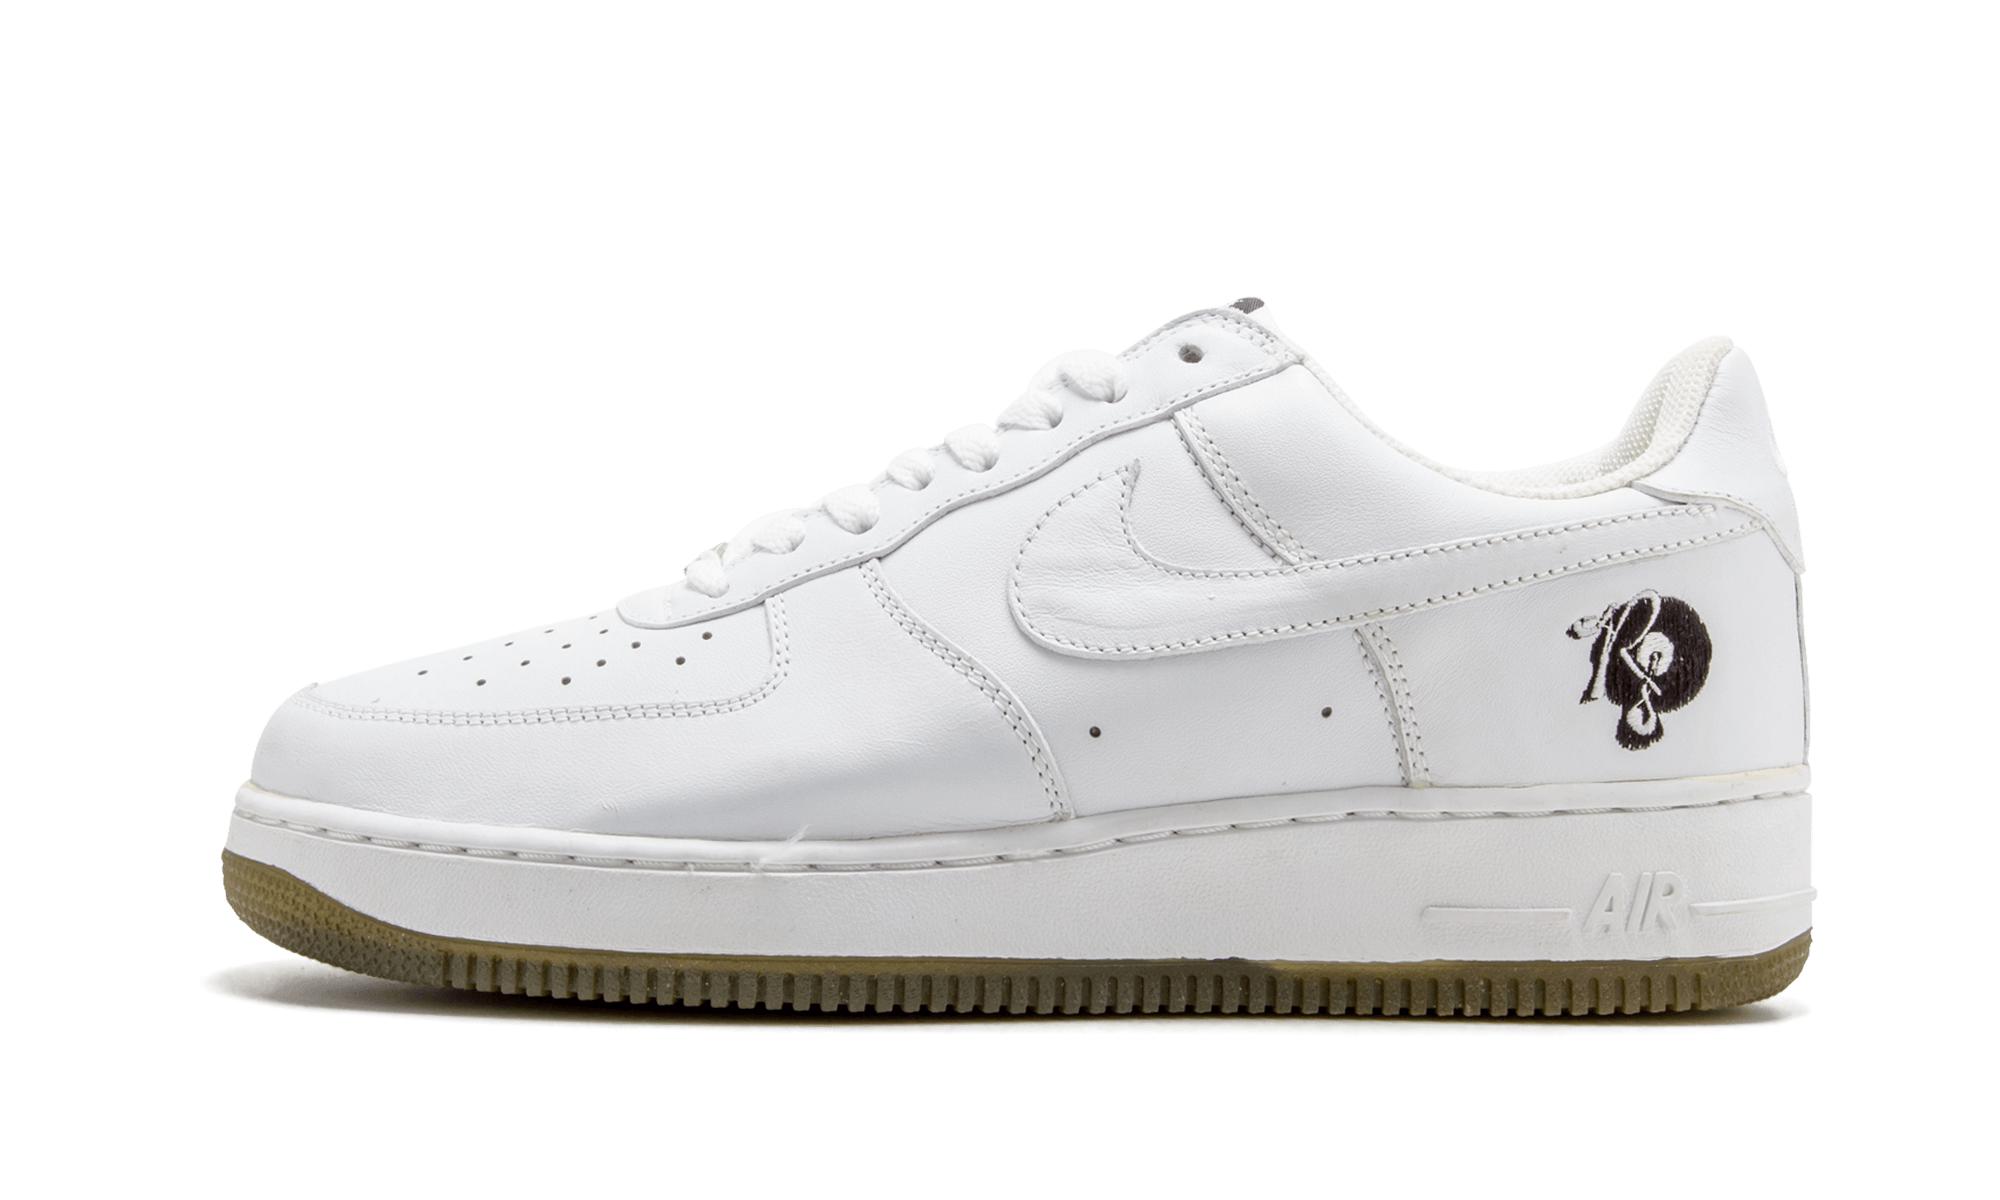 Nike Air Force 1 Le Prm in Black,White (White) for Men - Lyst